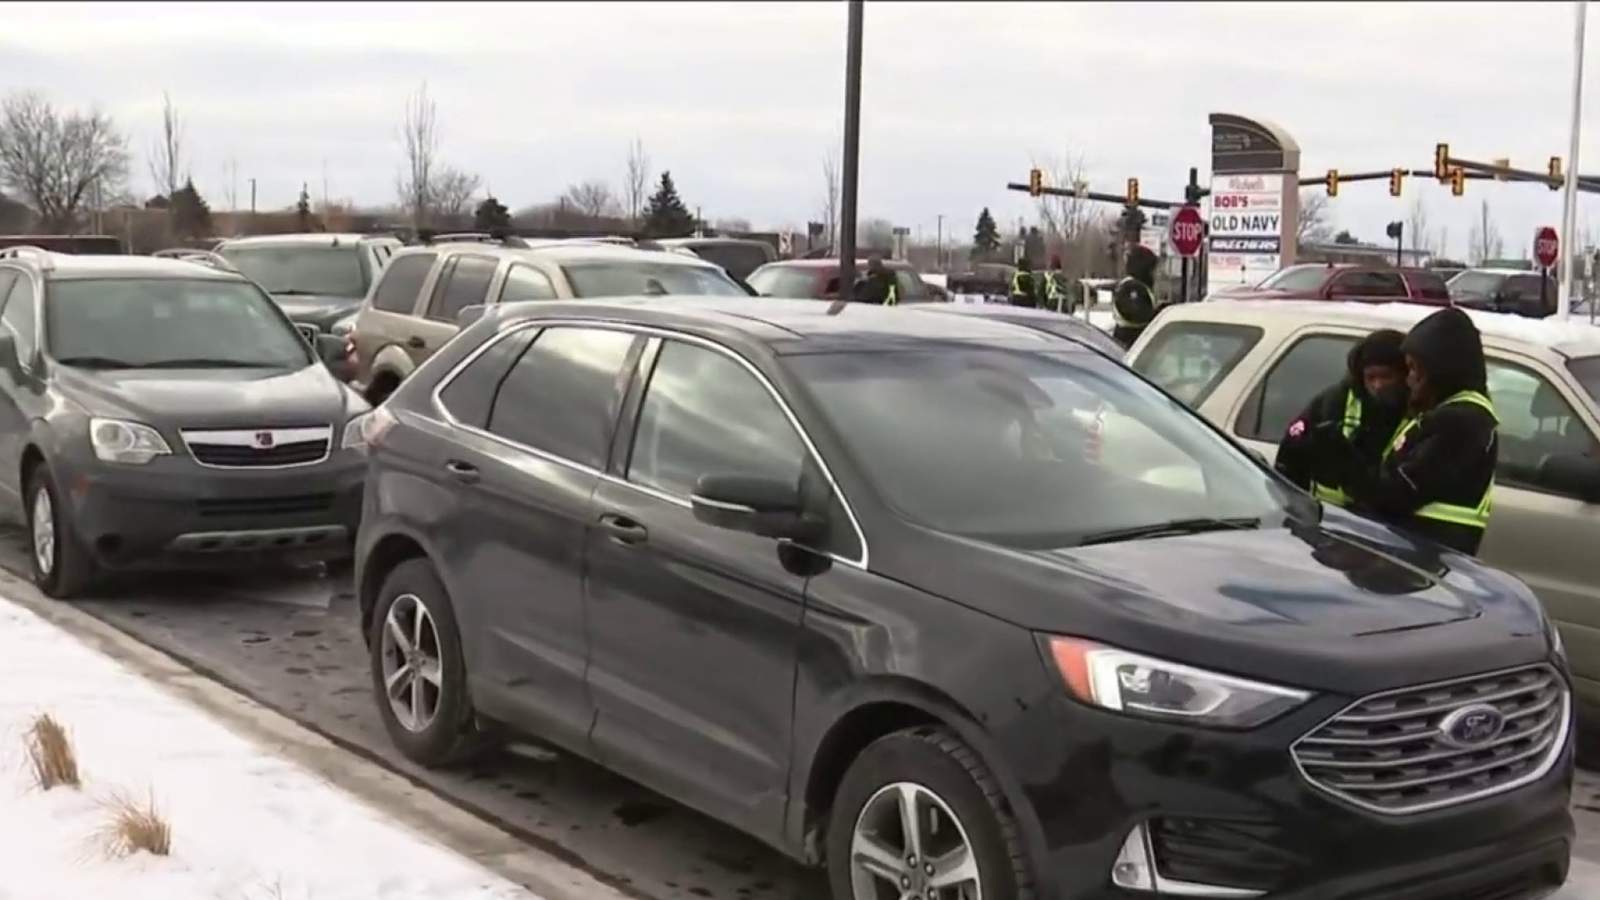 Cars line up for opening of Chick-fil-A in Shelby Township